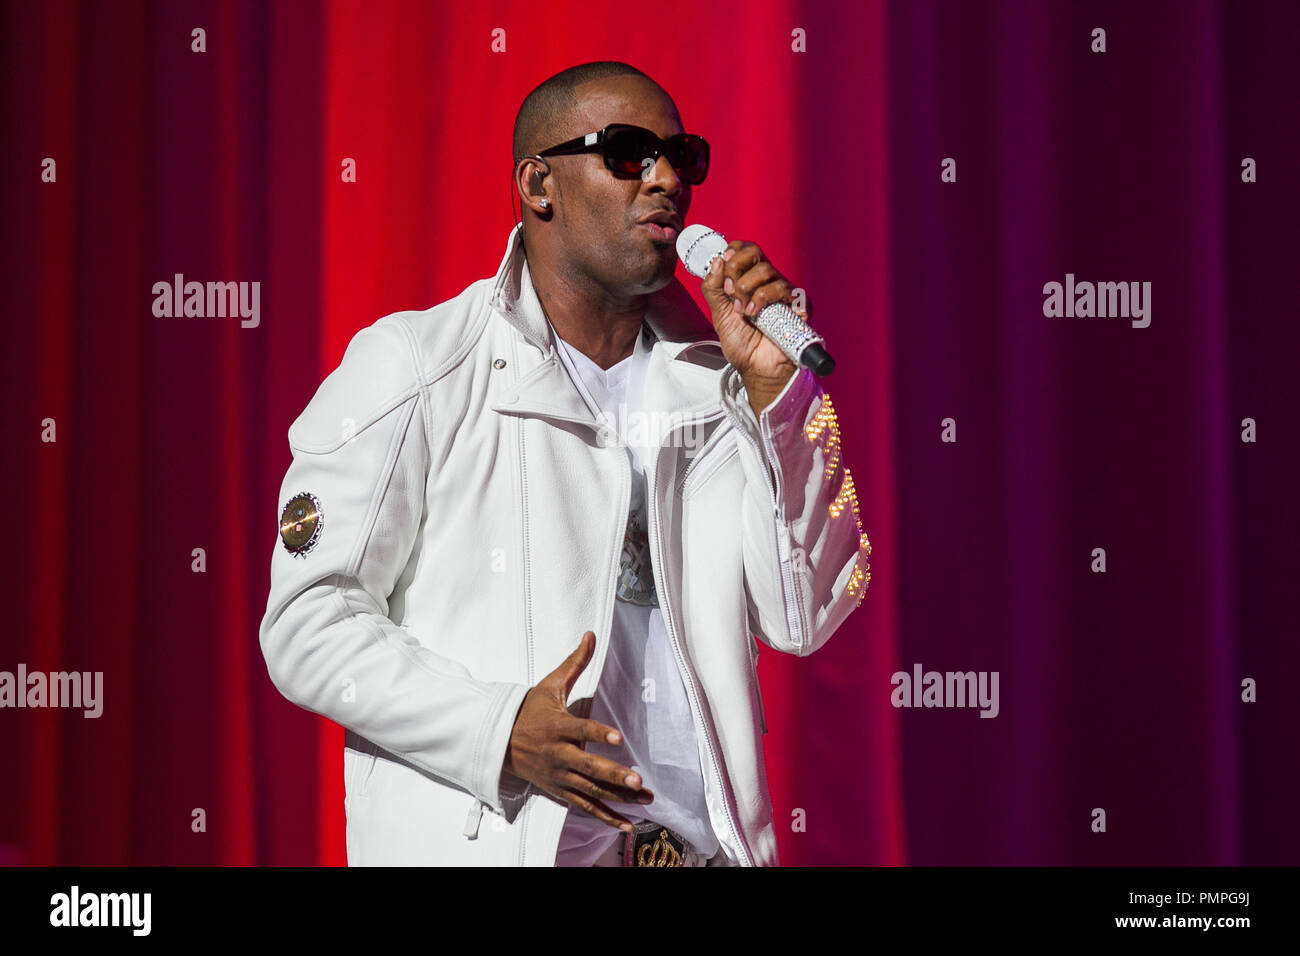 R Kelly performs during his 'Single Ladies' tour at Nokia Theatre L.A. LIVE on November 2, 2012 in Los Angeles. CA. Photo by Eden Ari / PRPP / PictureLux  File Reference # 31687 016PRPPEA  For Editorial Use Only -  All Rights Reserved Stock Photo